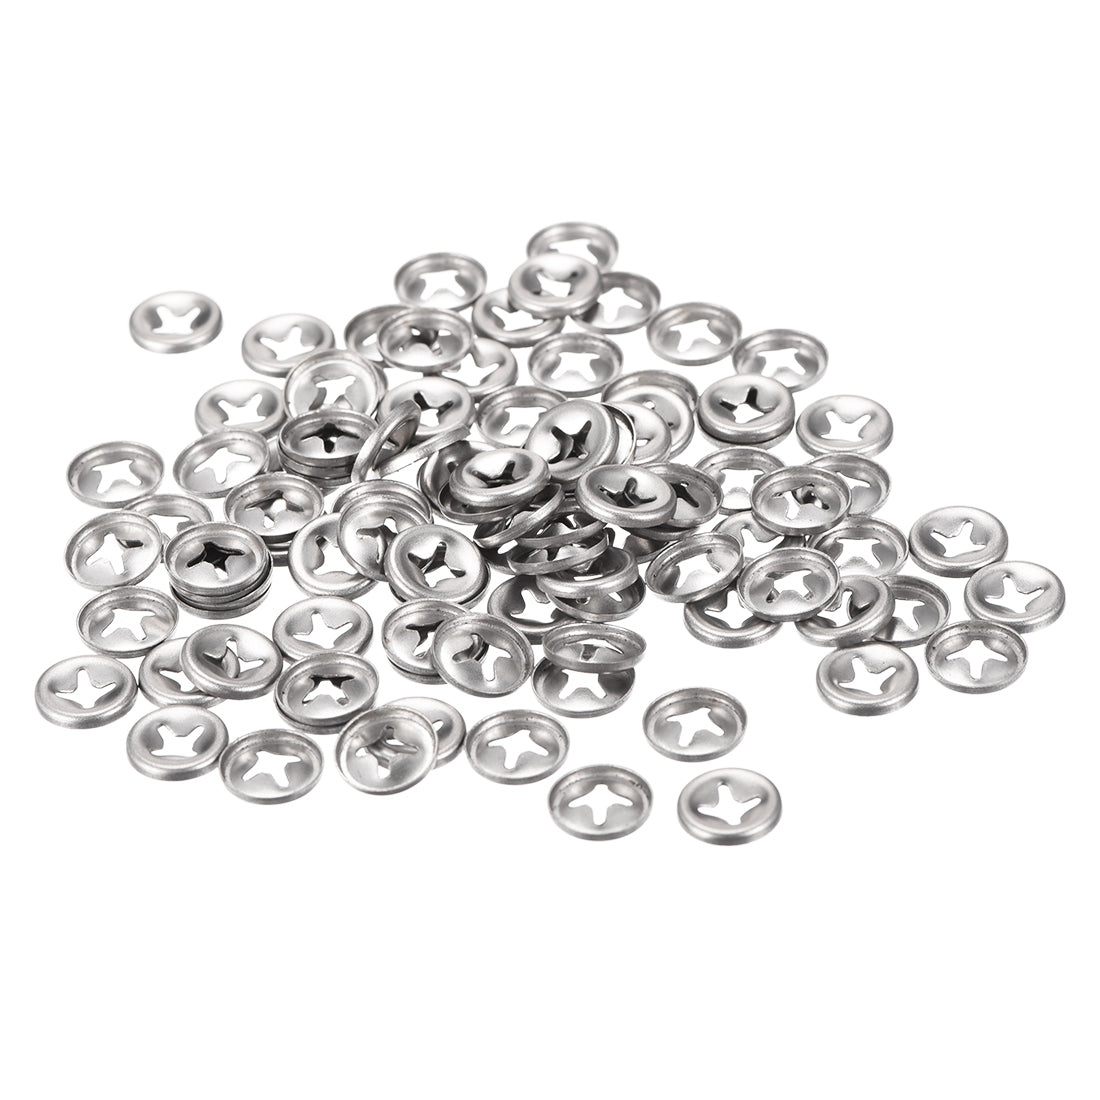 uxcell Uxcell M3 Internal Tooth Star Locking Washer 2.5mm I.D. 10mm O.D. Lock Washers Push On Locking Speed Clip, 304 Stainless Steel 100pcs